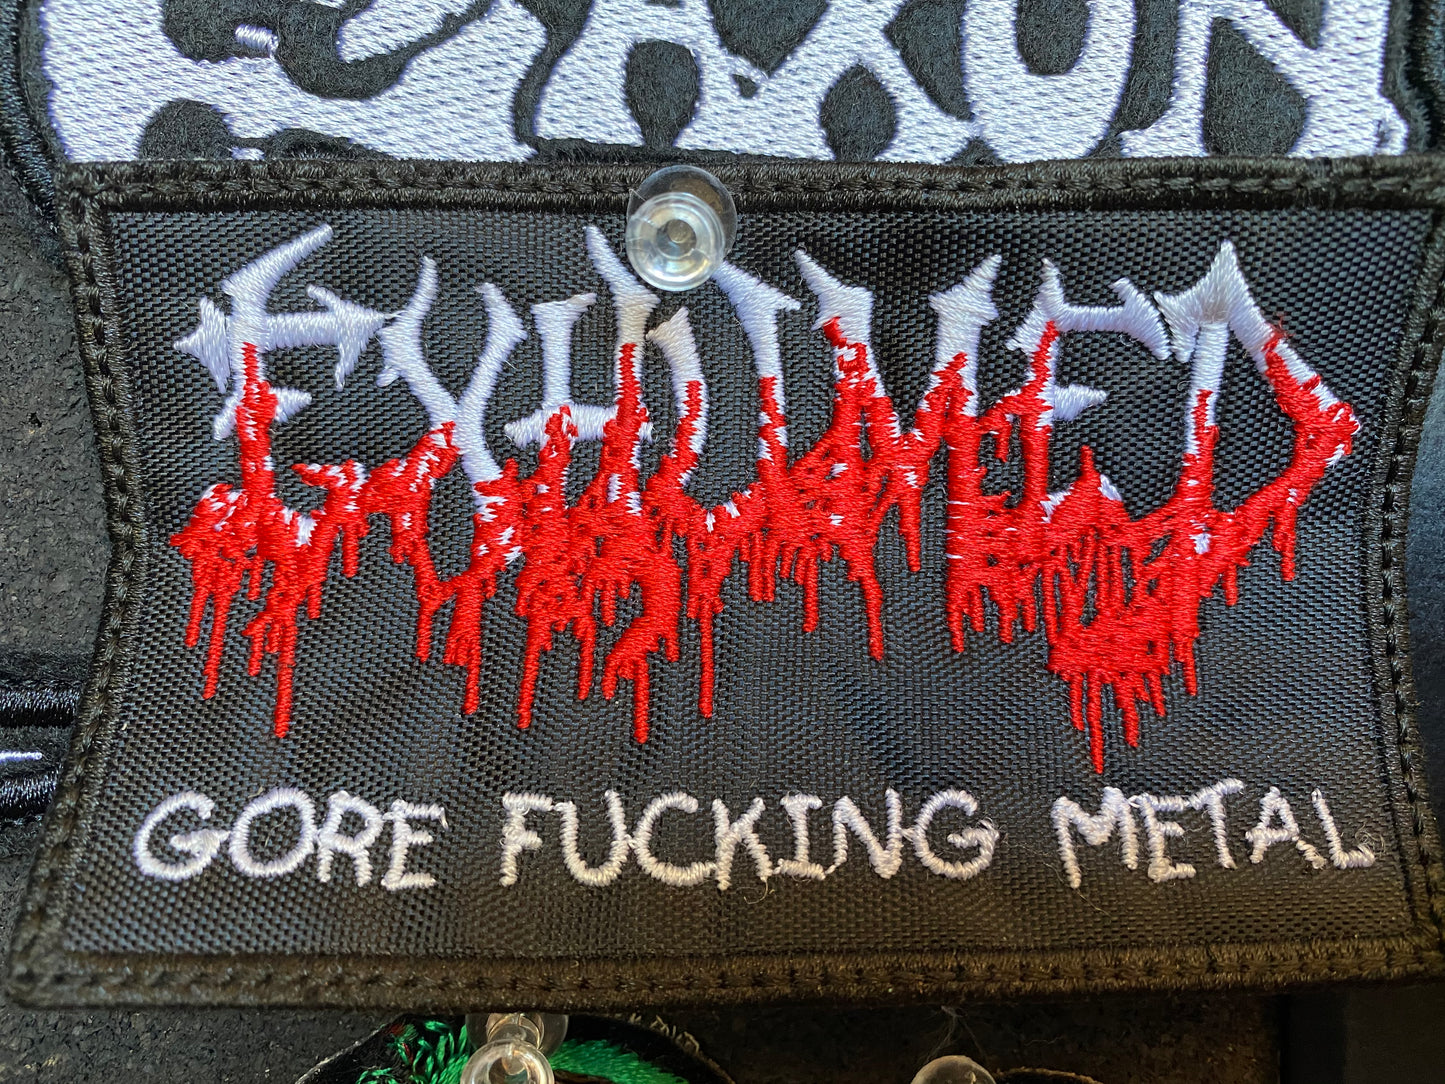 Exhumed “Gore Fucking Metal” Patch